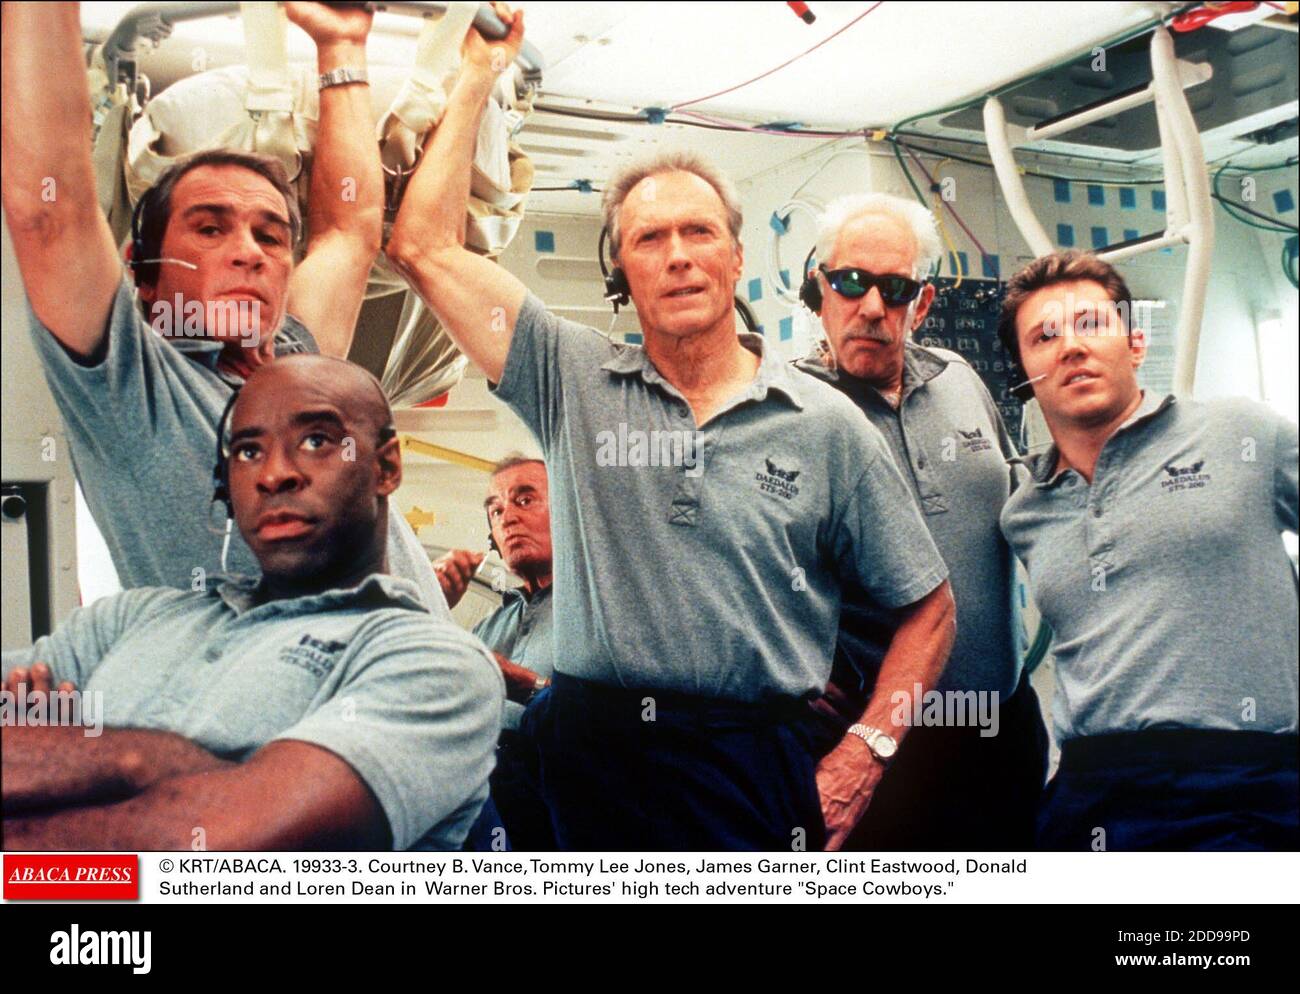 NO FILM, NO VIDEO, NO TV, NO DOCUMENTARY - © KRT/ABACA. 19933-3. Courtney B. Vance, Tommy Lee Jones, James Garner, Clint Eastwood, Donald Sutherland and Loren Dean in Warner Bros. Pictures' high tech adventure Space Cowboys. Stock Photo